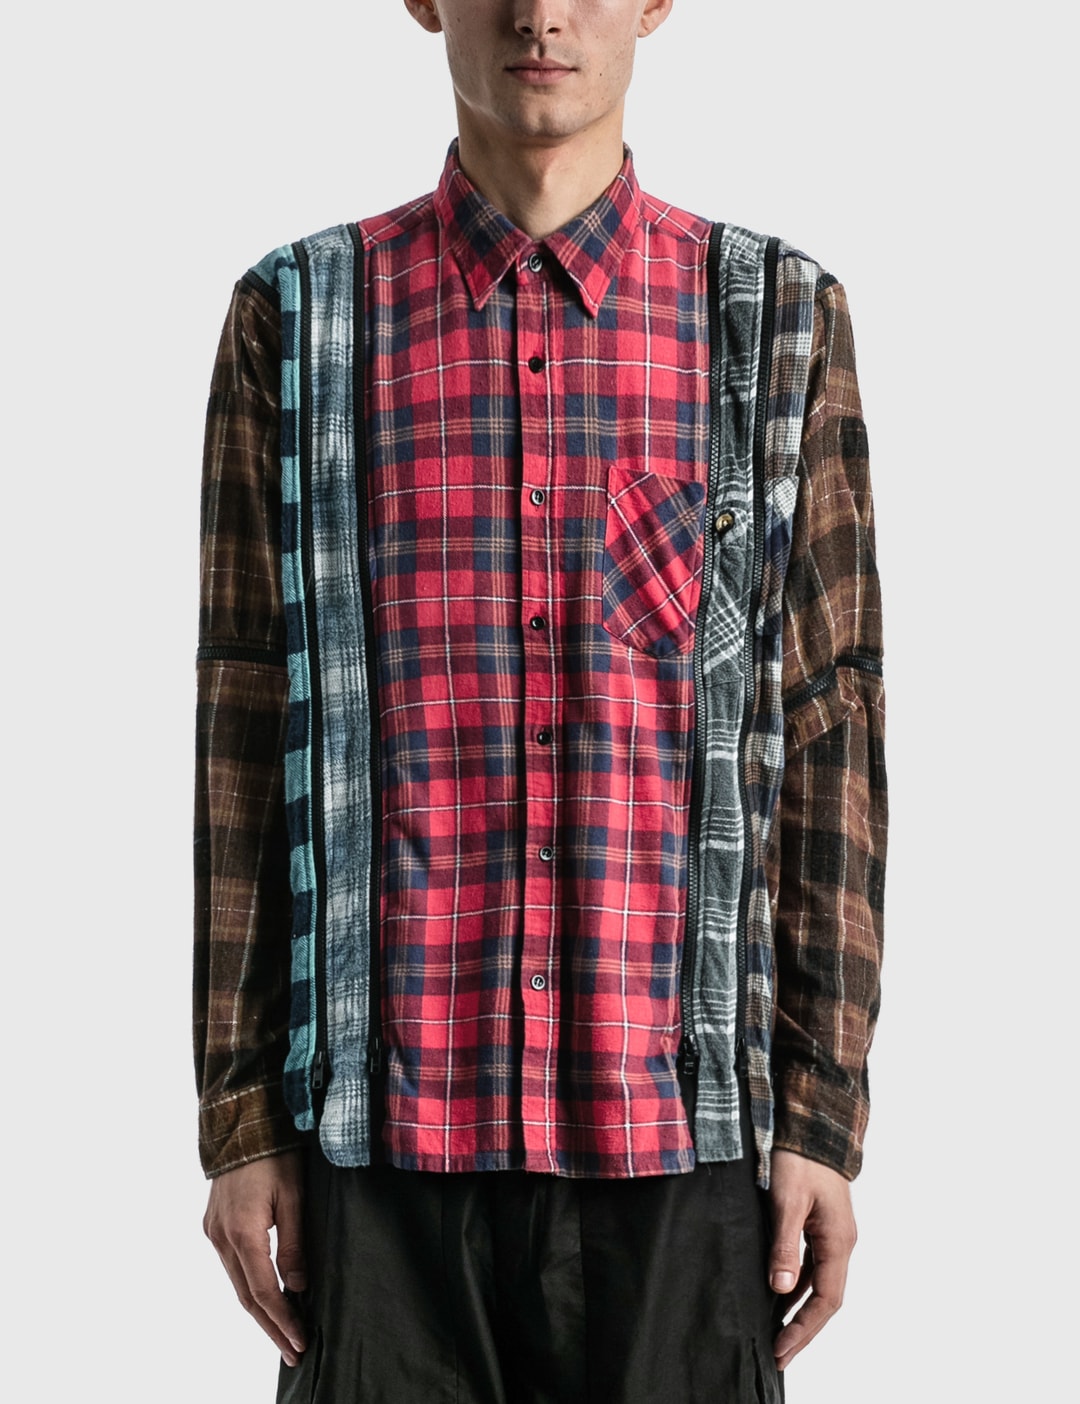 Needles - 7 Cuts Zipped Wide Flannel Shirt | HBX - Globally Curated ...